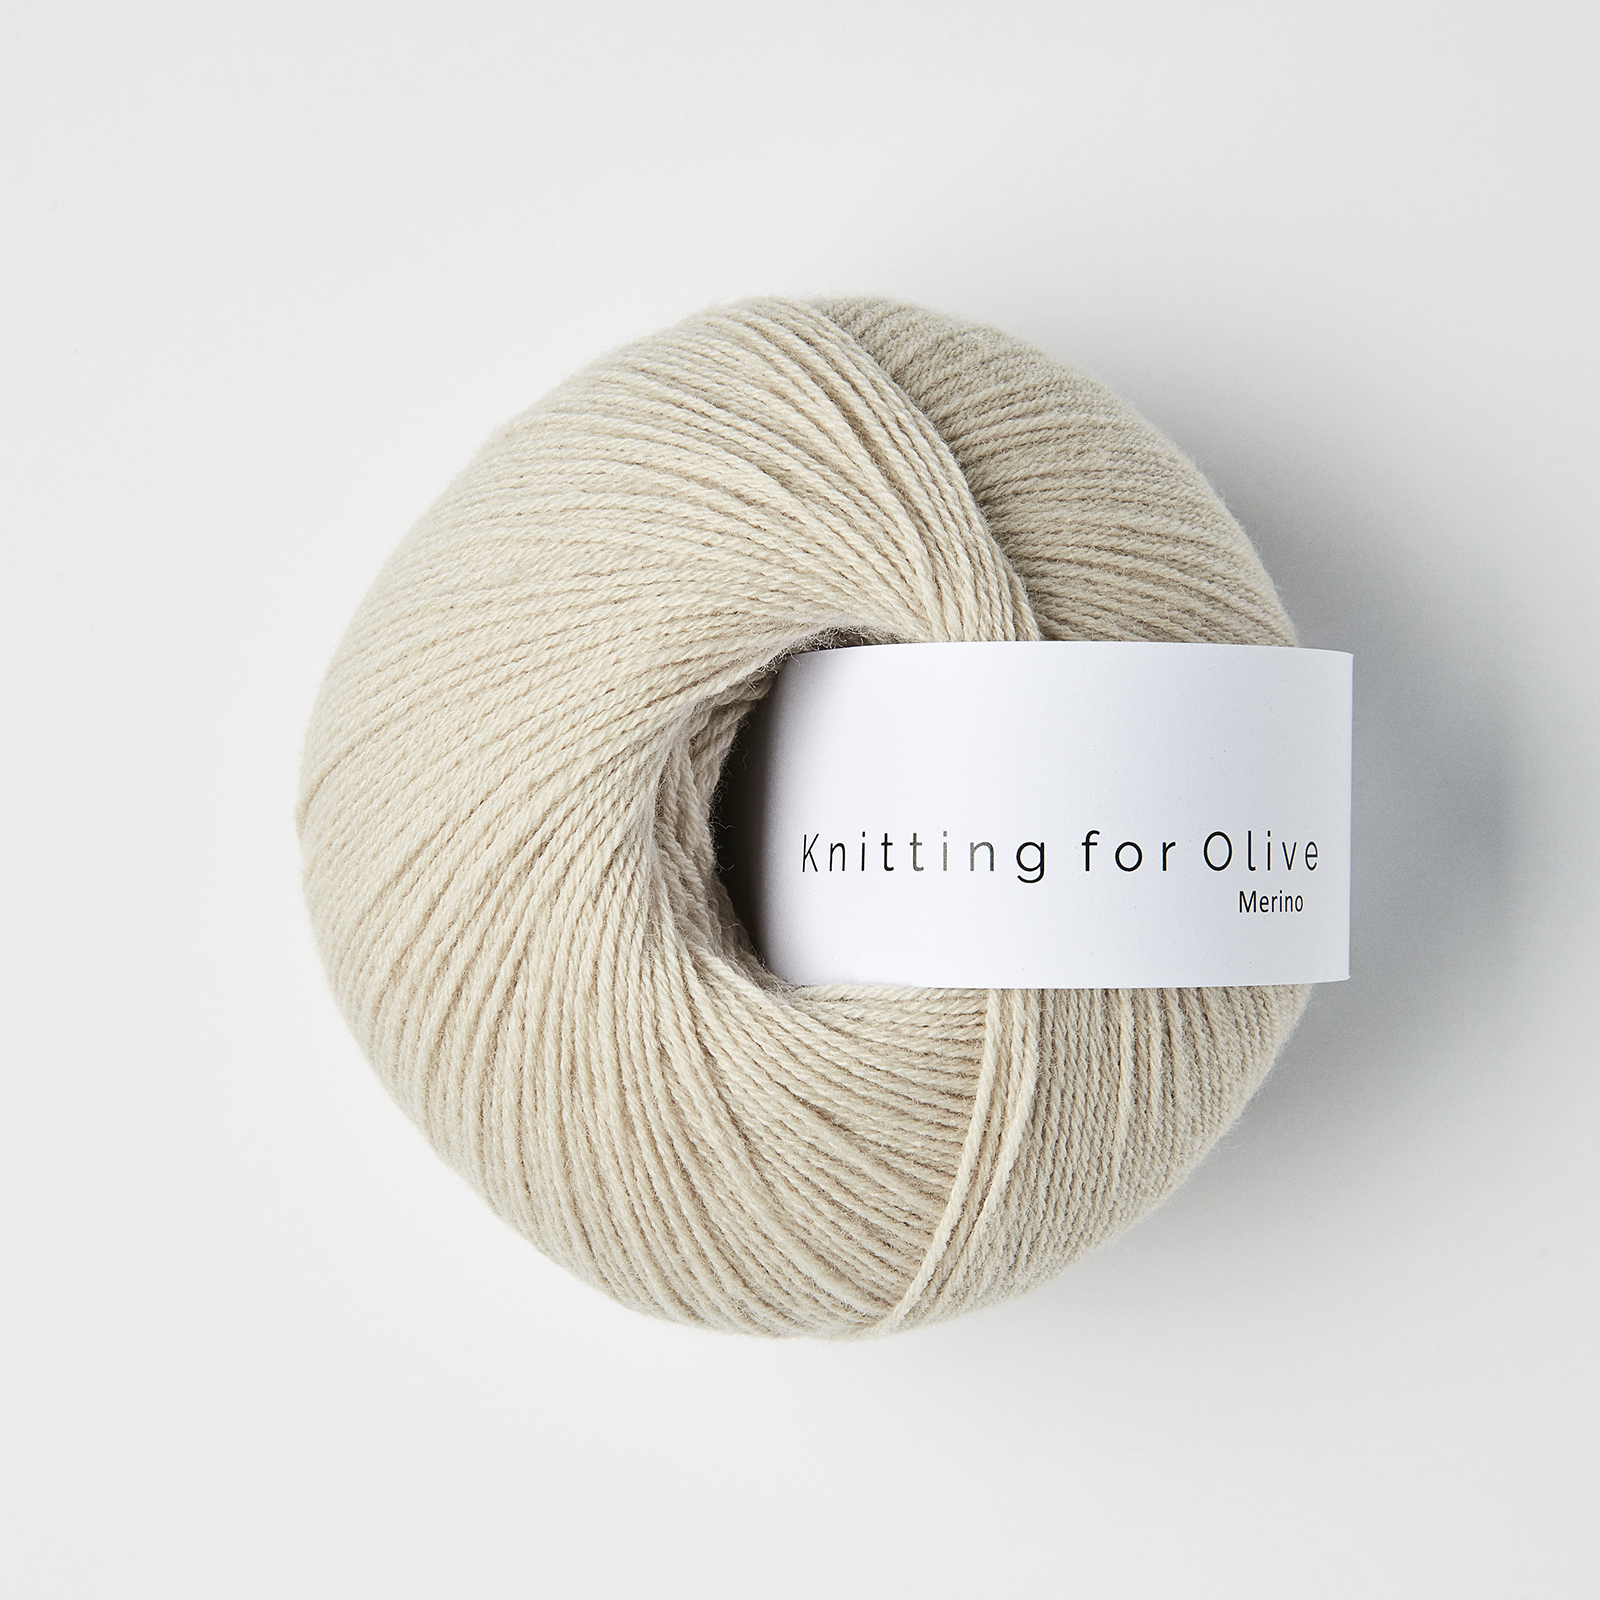 Merino (Knitting for Olive): marzipan